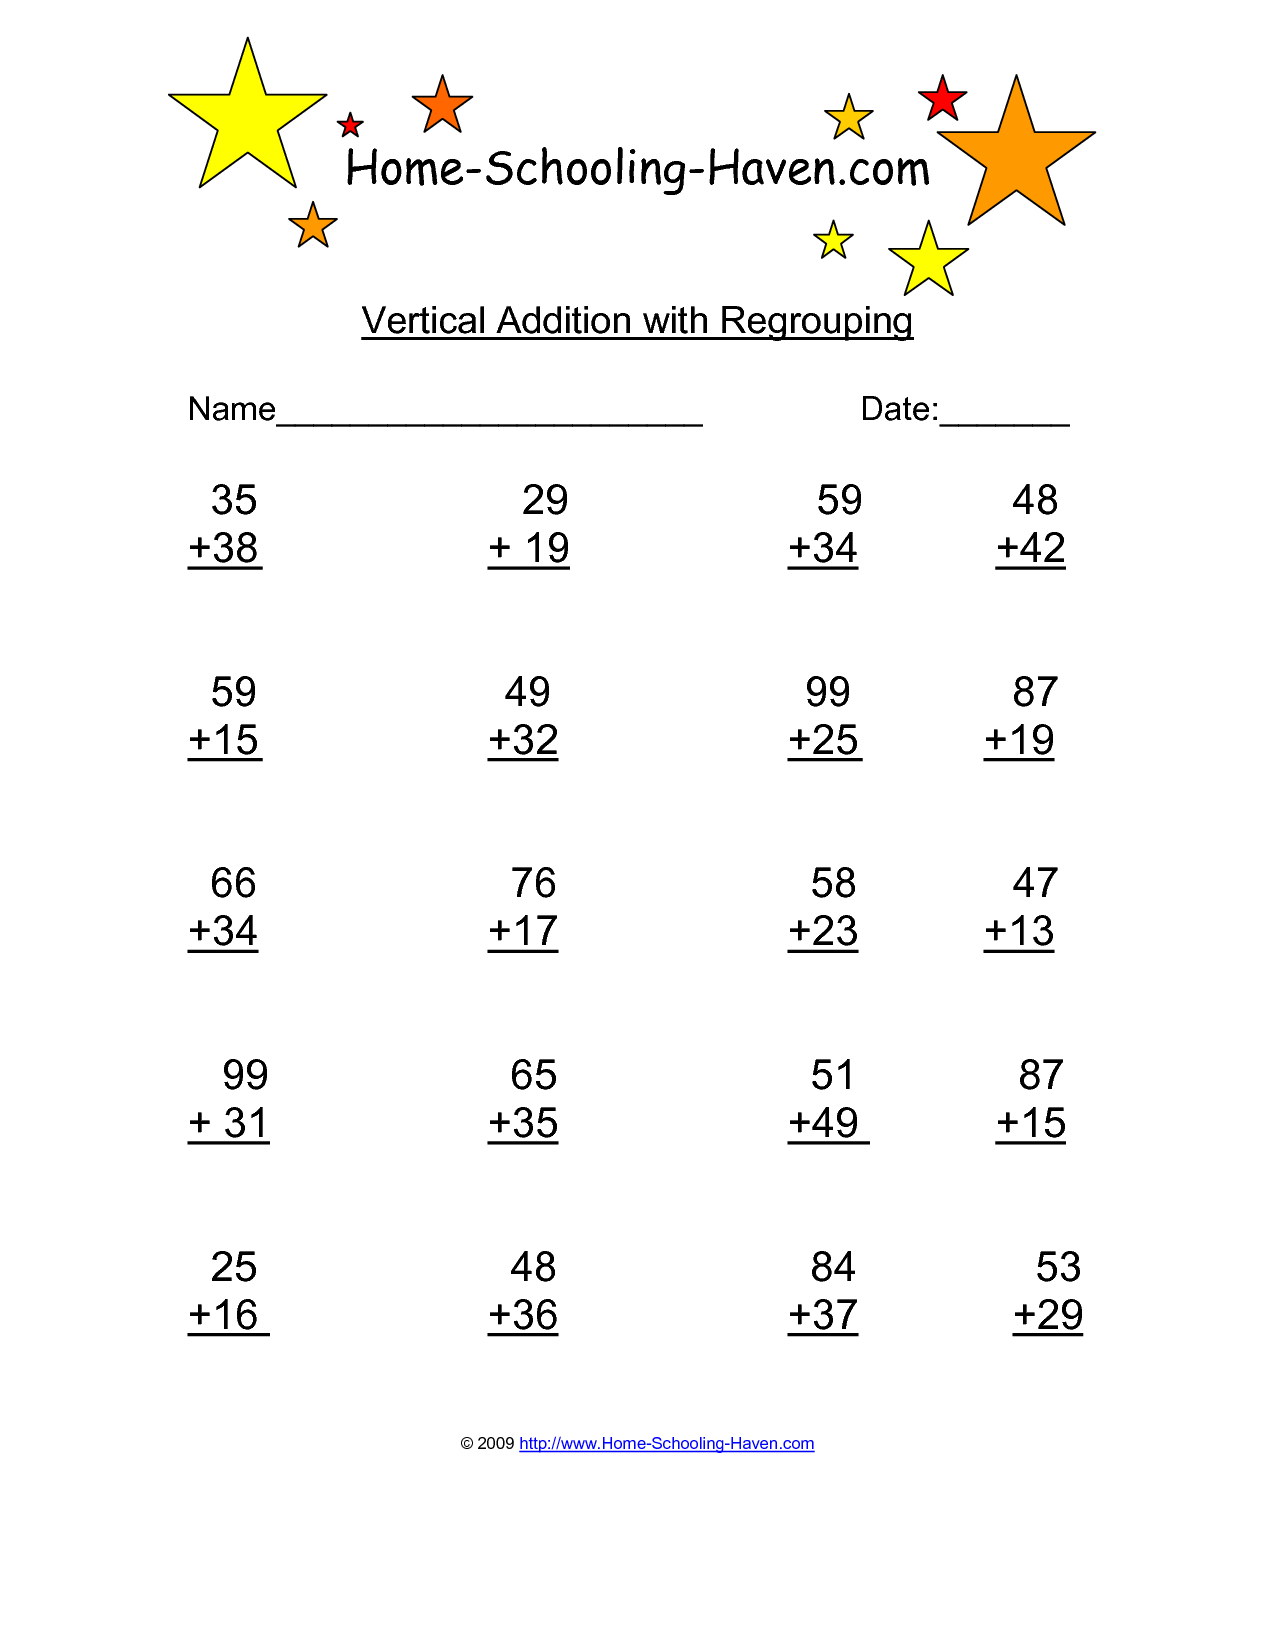 11 Best Images of Vertical Addition Worksheets - Addition and